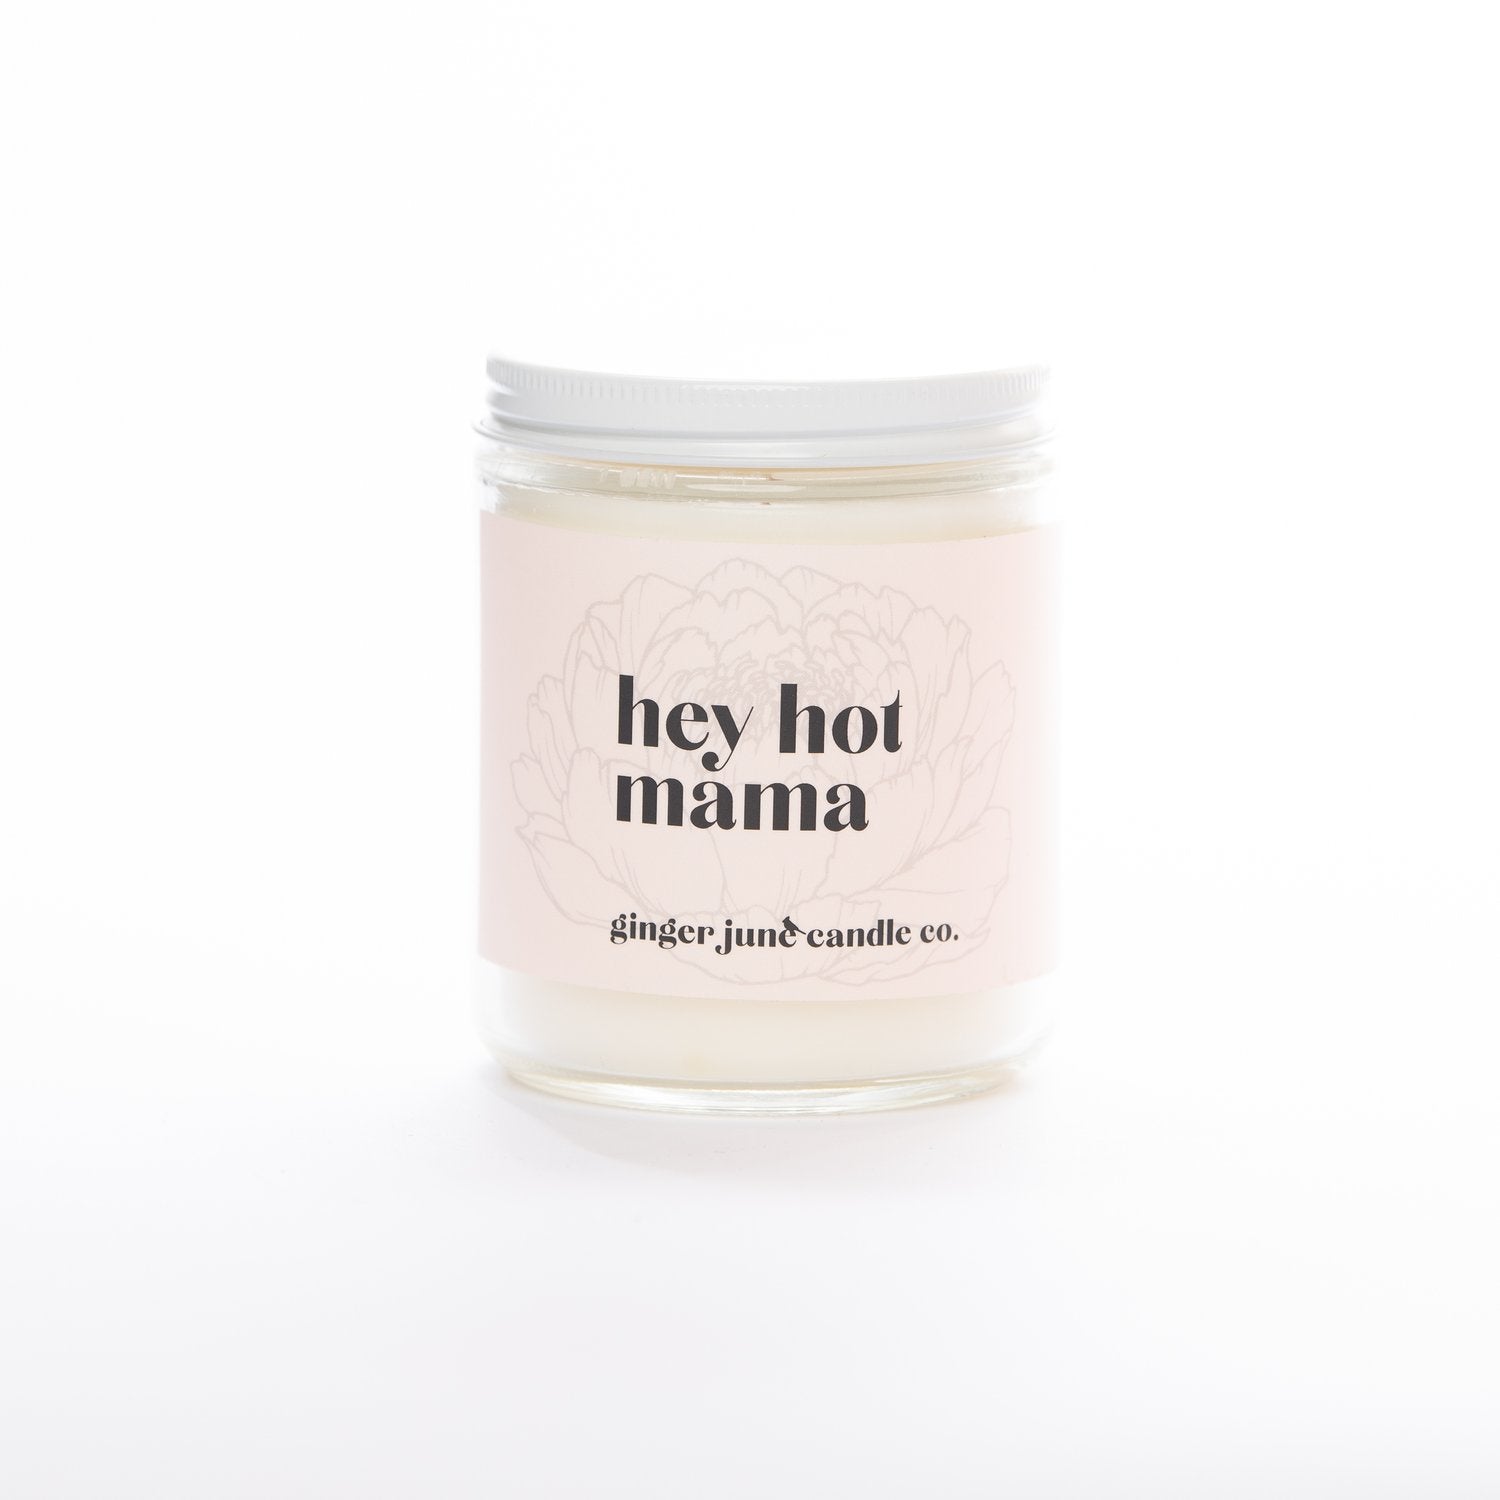 Hey Hot Mama Candle by Ginger June Candle Co.